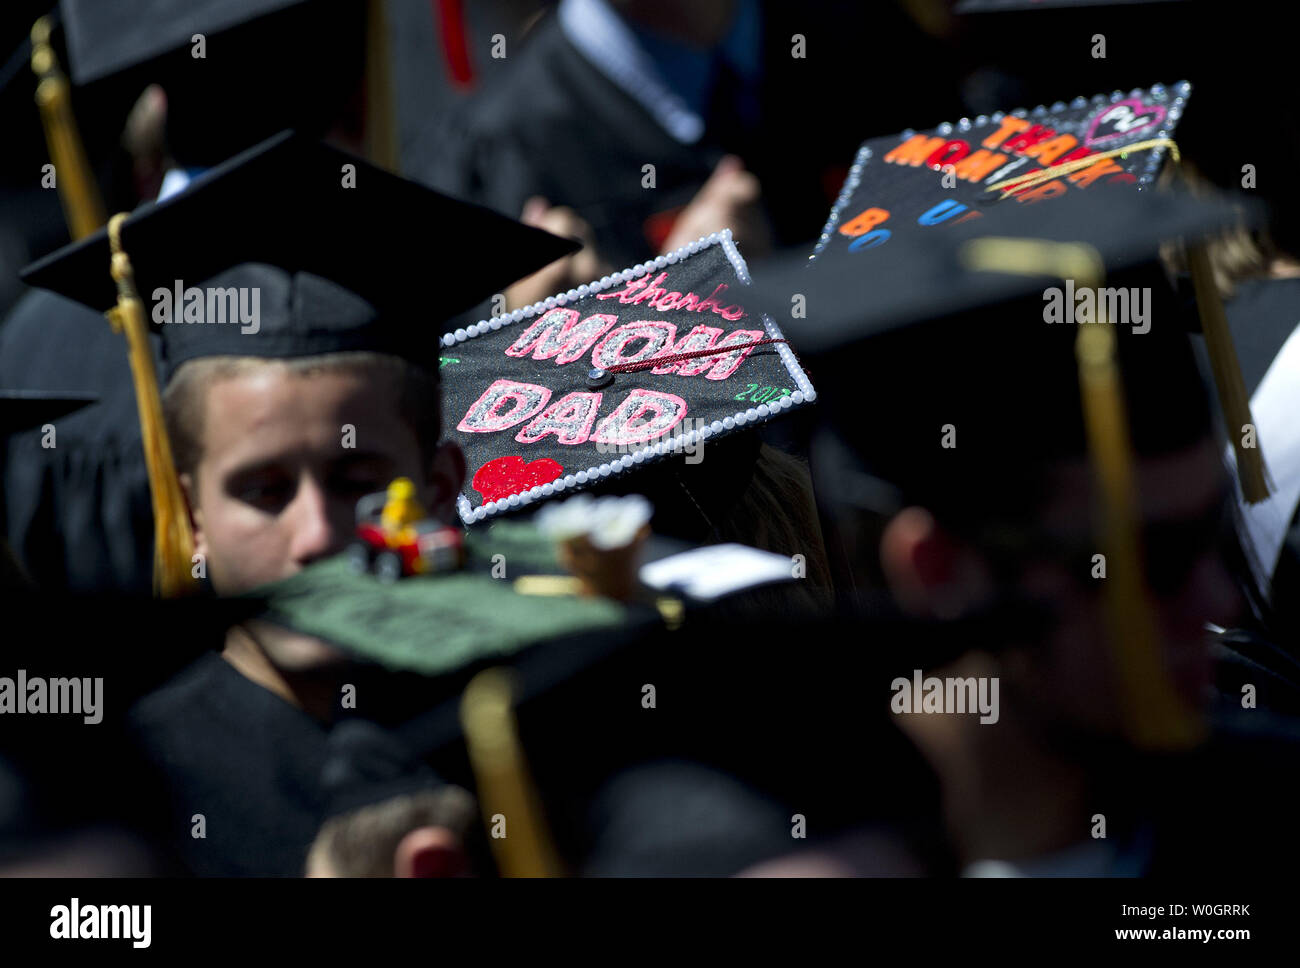 A Decorated Mortar Board Is Seen During The 2012 Virginia